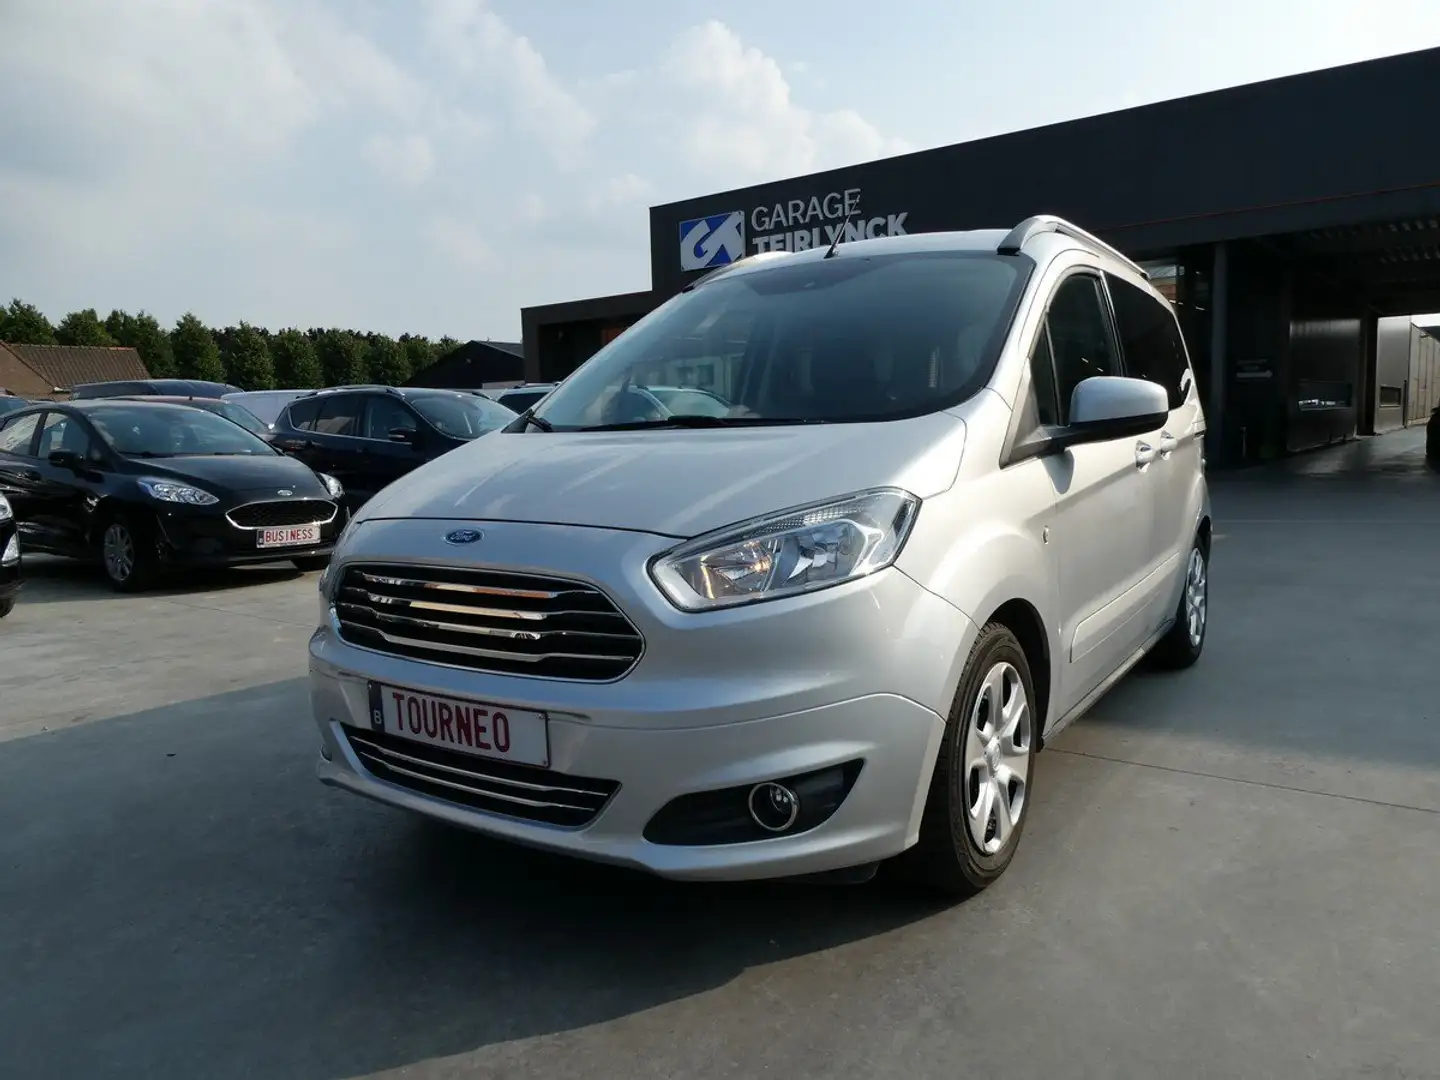 Ford Tourneo Courier 1.6 TDCi 95pk 5plaats LIMITED '15 73000km (36418) Argent - 1